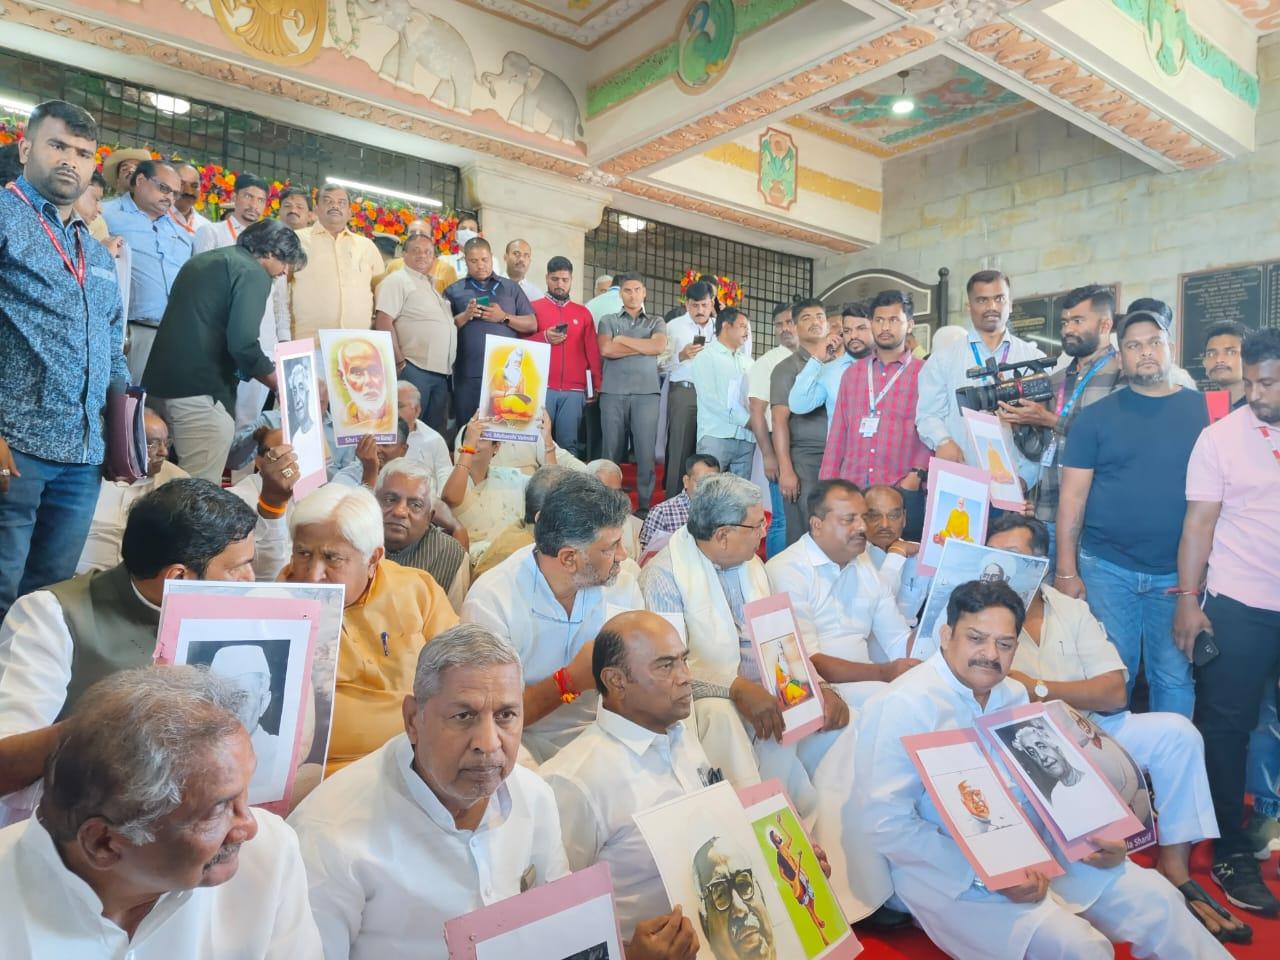 The Congress led by Leader of Opposition in the Assembly Siddaramaiah and party's state President D K Shivakumar staged a demonstration outside 'Suvarna Vidhana Soudha' holding pictures of several national and state icons like Kuvempu, Narayana Guru, Shishunala Sharif, Pandit Jwaharlal Nehru, Babu Jagjivan Ram among others (Pic/Official Twitter handle of Karnataka Congress)